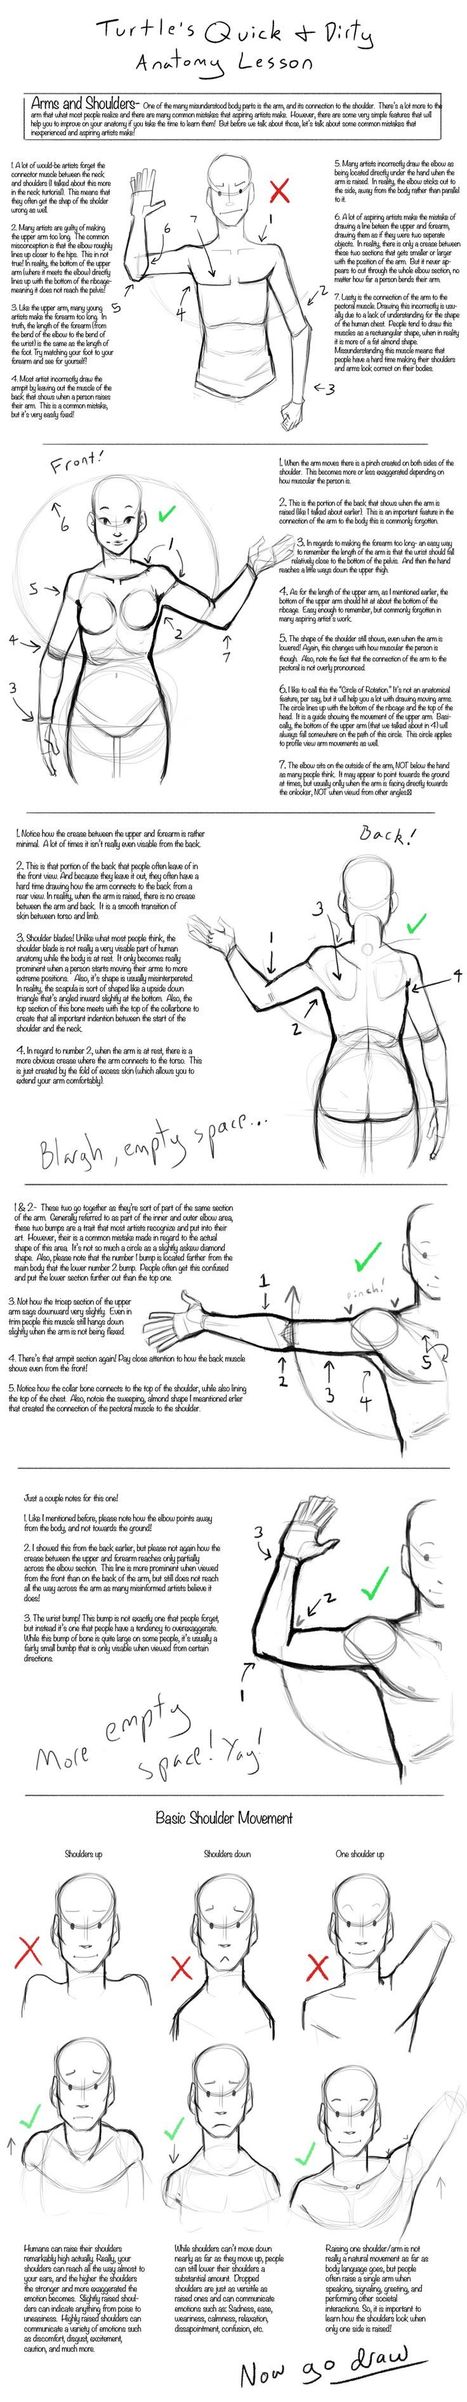 Anatomy Reference Guide | Drawing References and Resources | Scoop.it